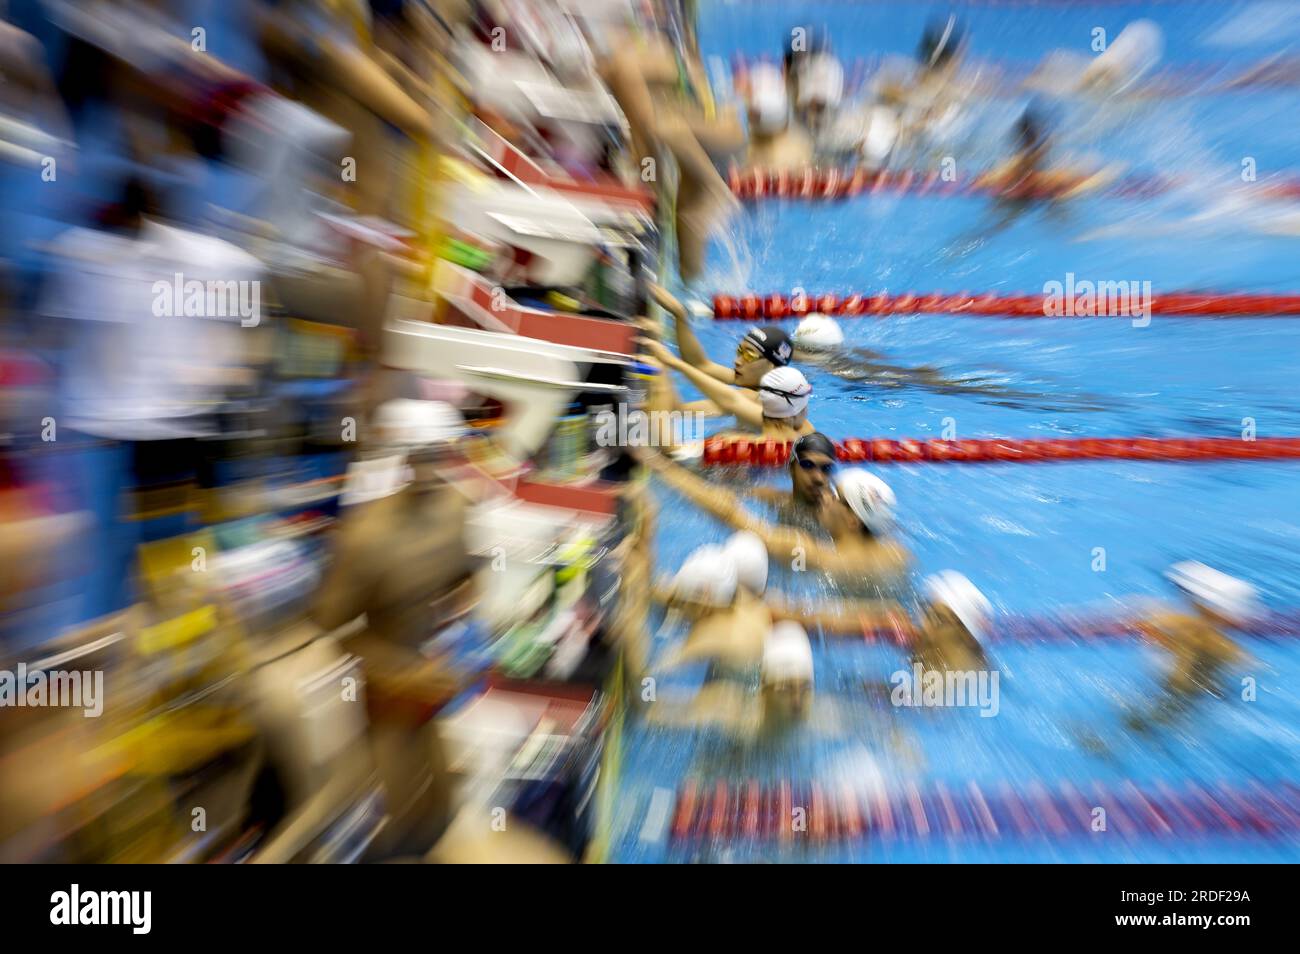 FUKUOKA - Crowded swimmers during training in the competition pool for the World Swimming Championships in Japan. ANP KOEN VAN WEEL Stock Photo